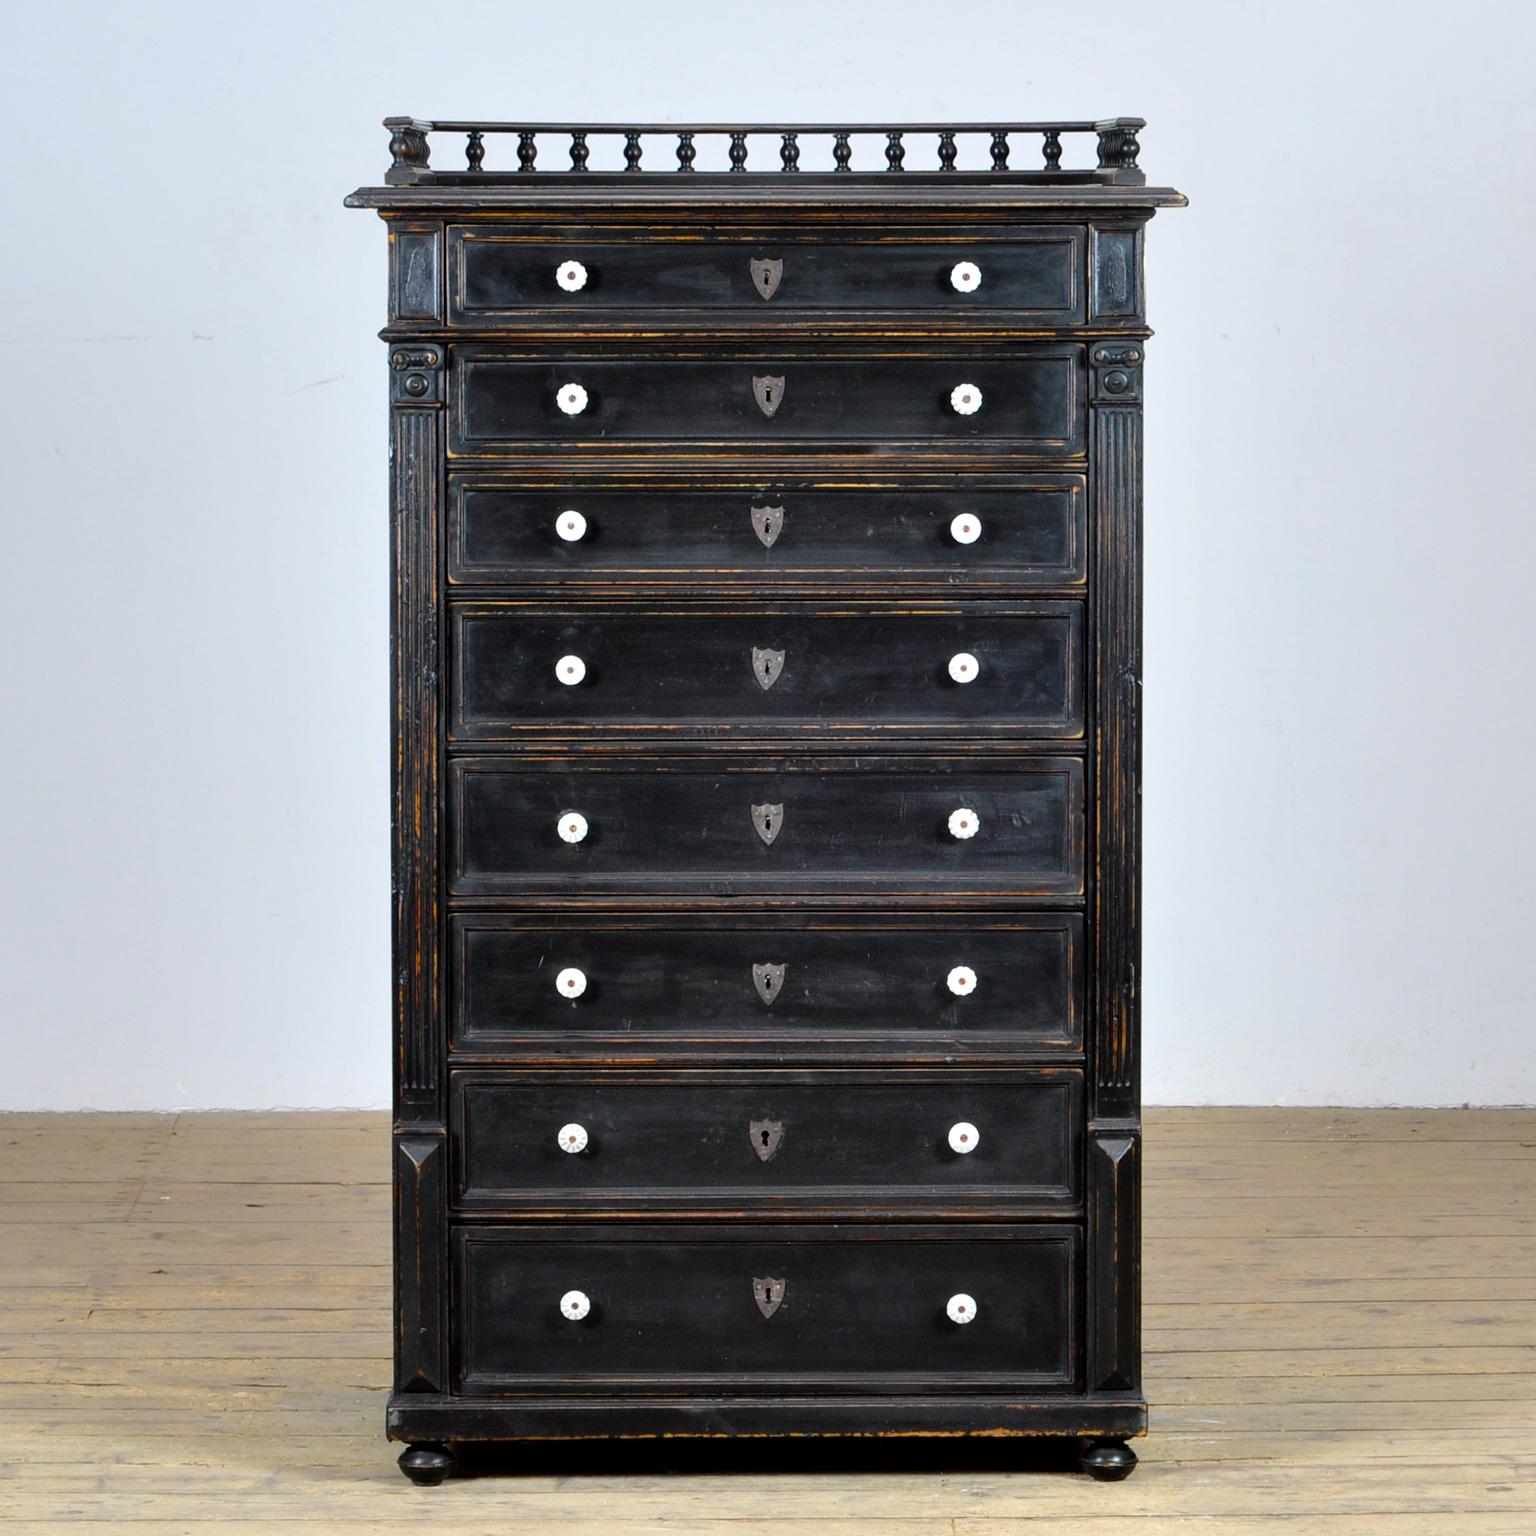 Chest of drawers with raised edge made in Hungary circa 1910. The cabinet is made of pine wood.
The cabinet has 8 drawers, all of which are made with dovetail connections. The drawers differ in height.
All fittings and knobs are original.